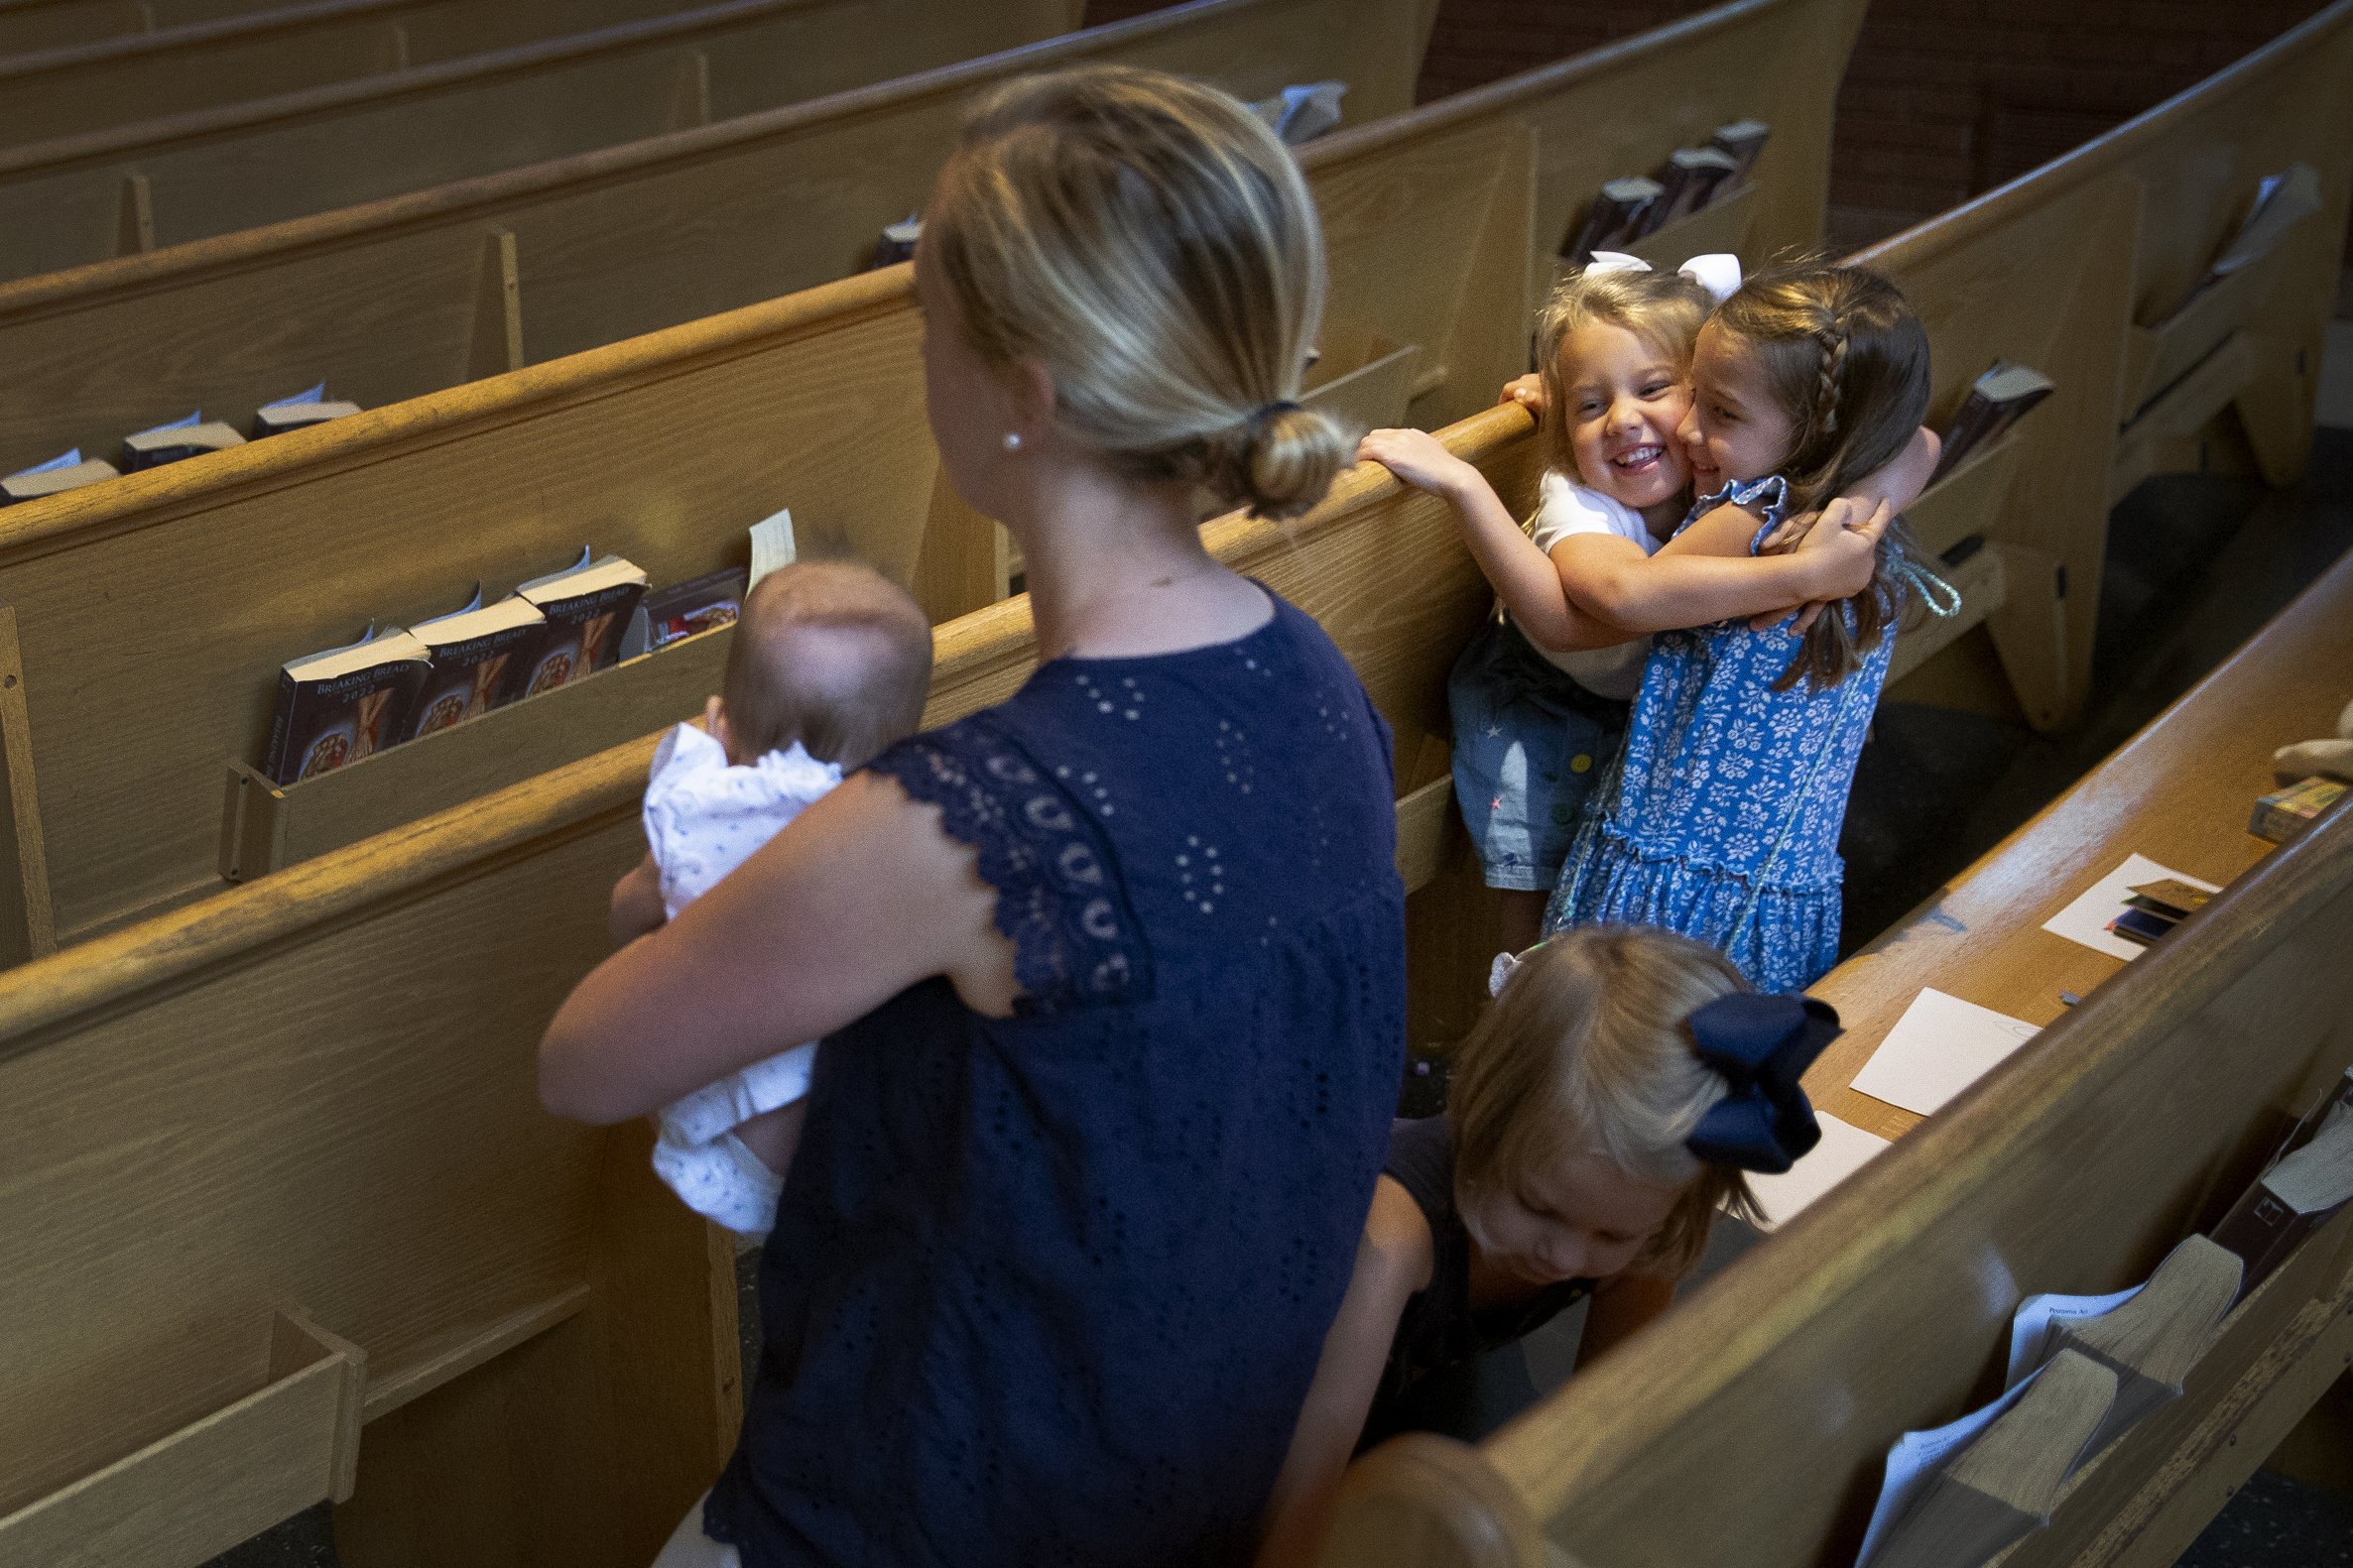  Eliza Rosa, 4, (left in hug) and Maria Rosa, 6, embraced during Mass next to their mother, Caroline Rosa, and siblings Josephine Rosa, 3, and Frances Rosa, 5 months, on June 10 at St. Peter Church in Kirkwood, Missouri. The Rosas have been parishion